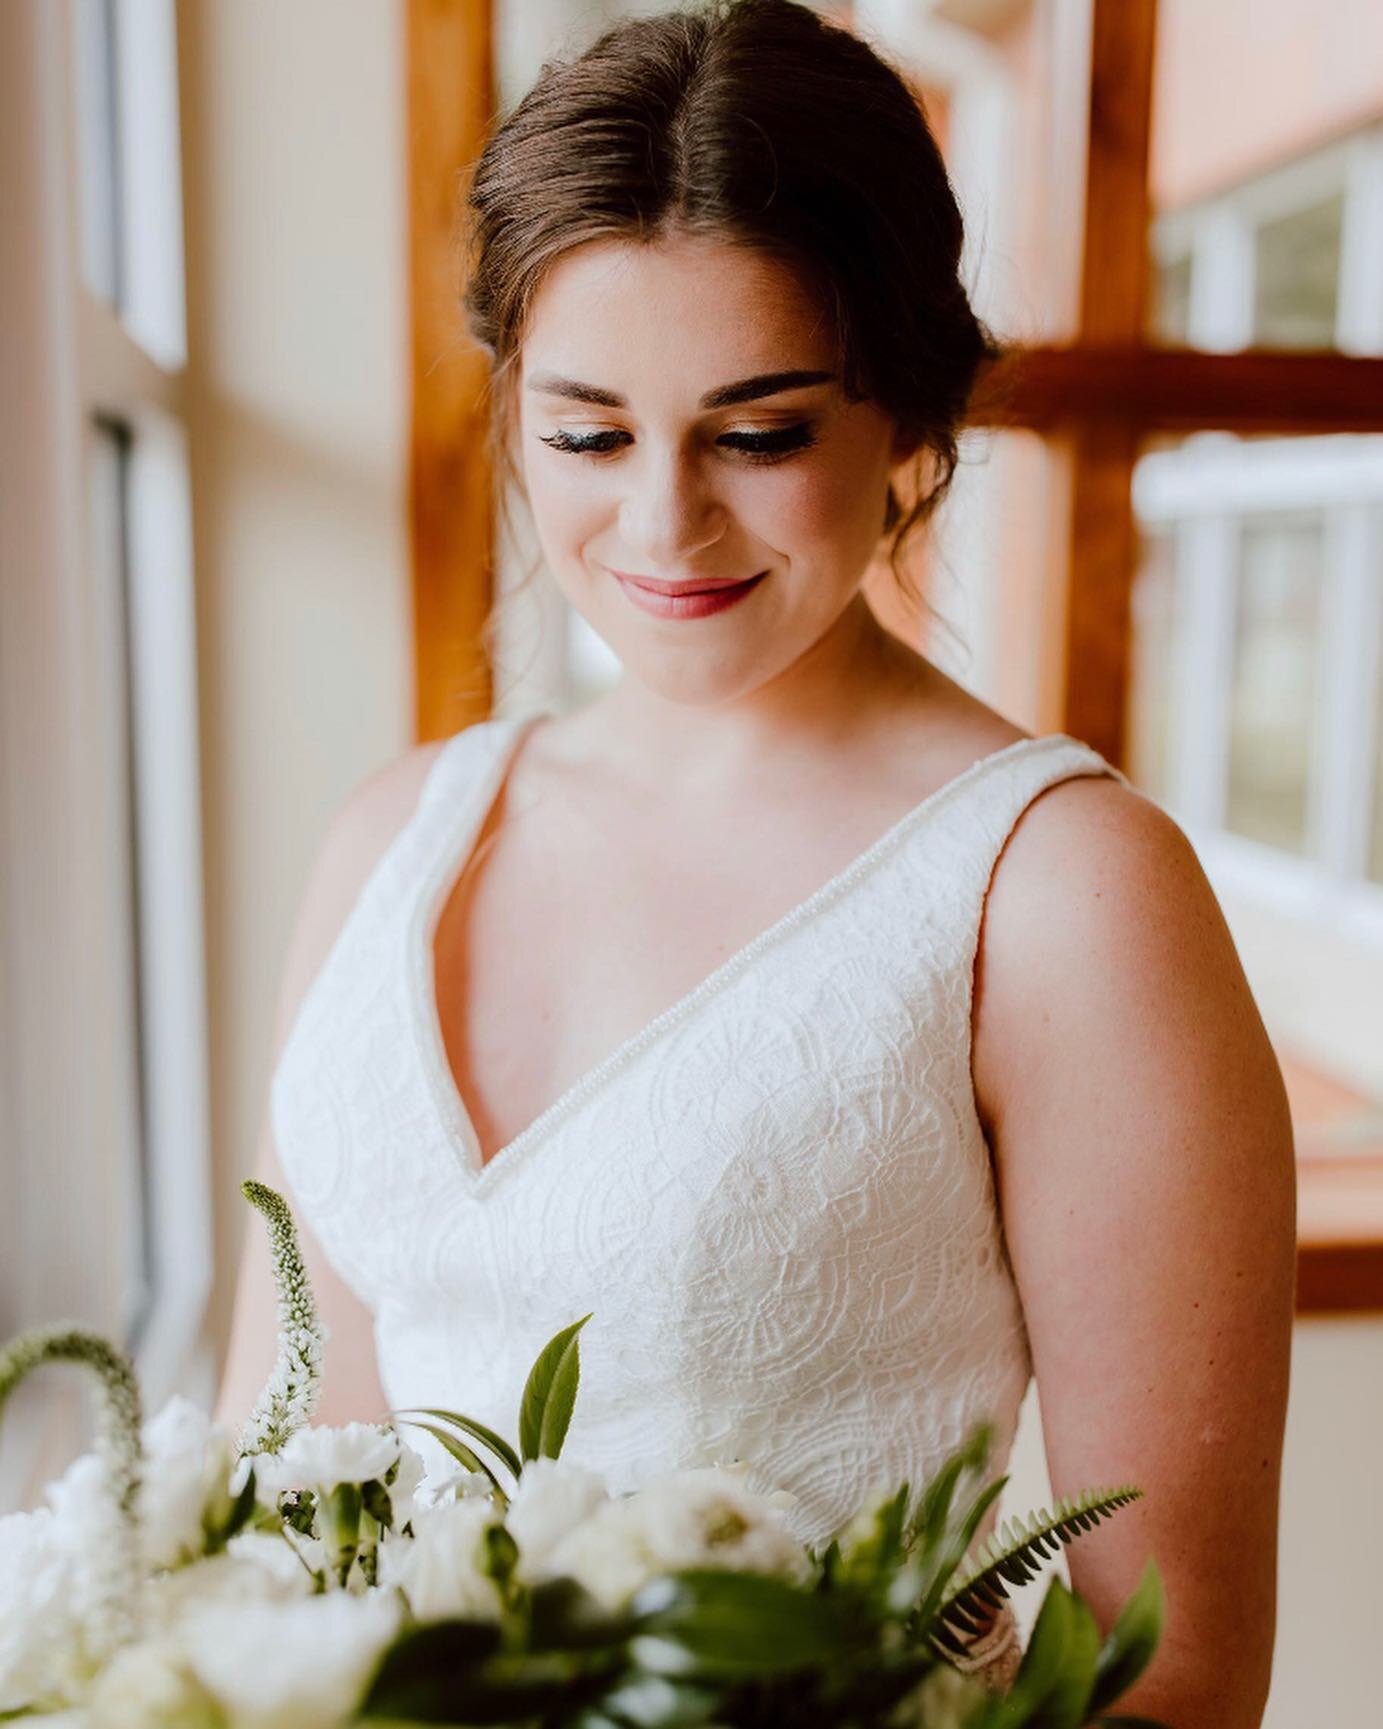 Absolutely gorgeous bride !! 🥰

For Inquiries-
HTTPS://www.makeupbycaitlin.com

https://www.facebook.com/makeupbycaitlinspah/

Instagram : @caitlinguillien_mua 

Available Wedding Dates

October
2nd 9th 16th 21st 28th

November 
 11th 

December 
2n